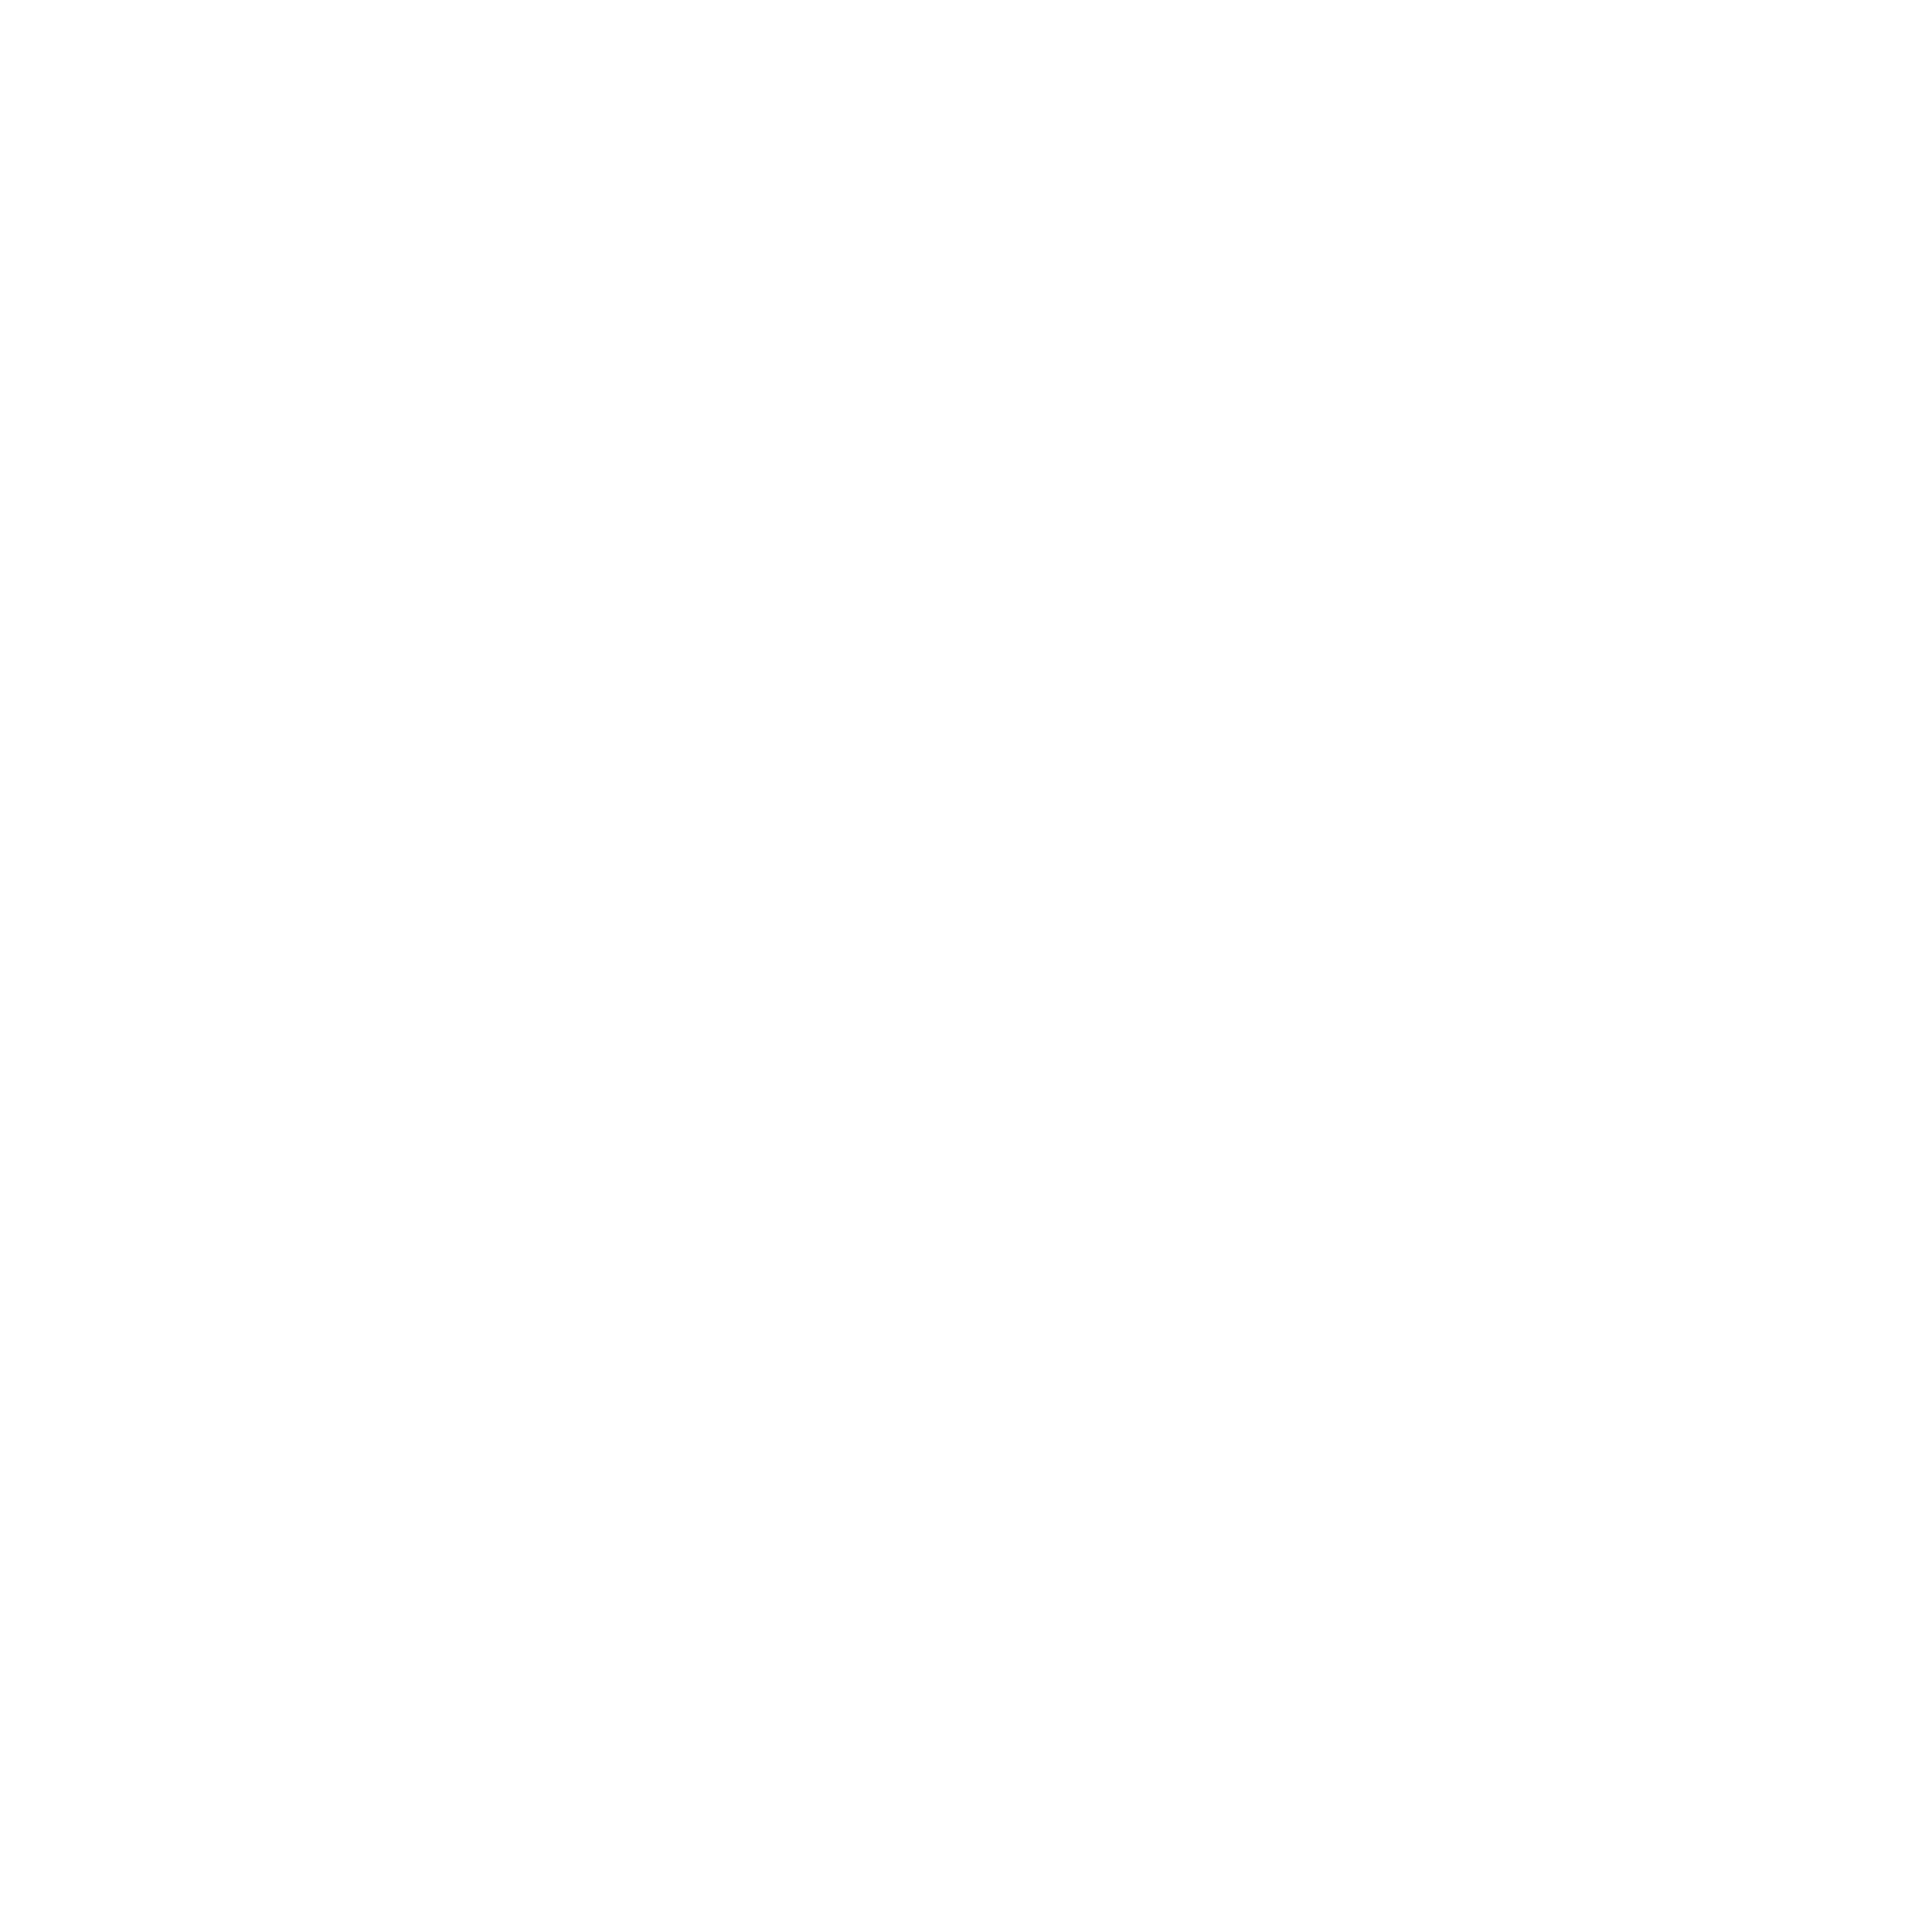 DeepBrain Chain Cryptocurrency icon